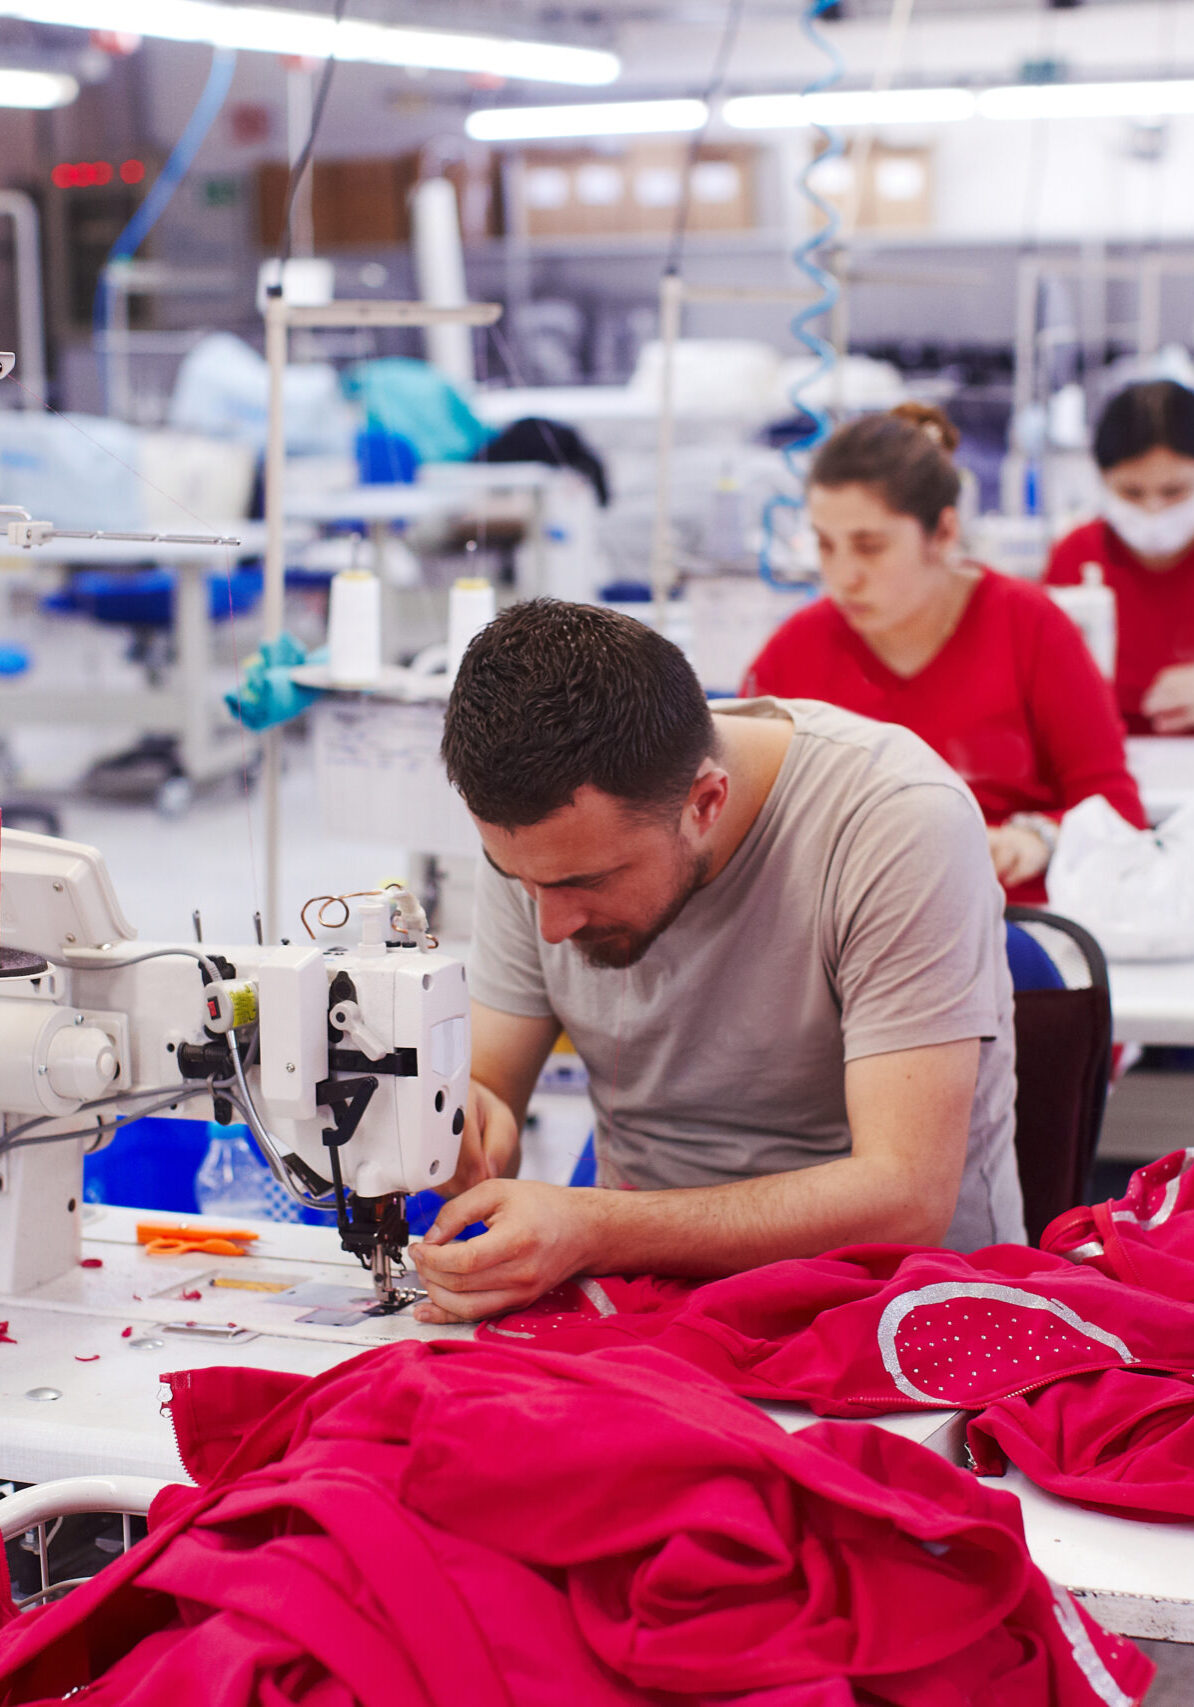 Factory workers sewing